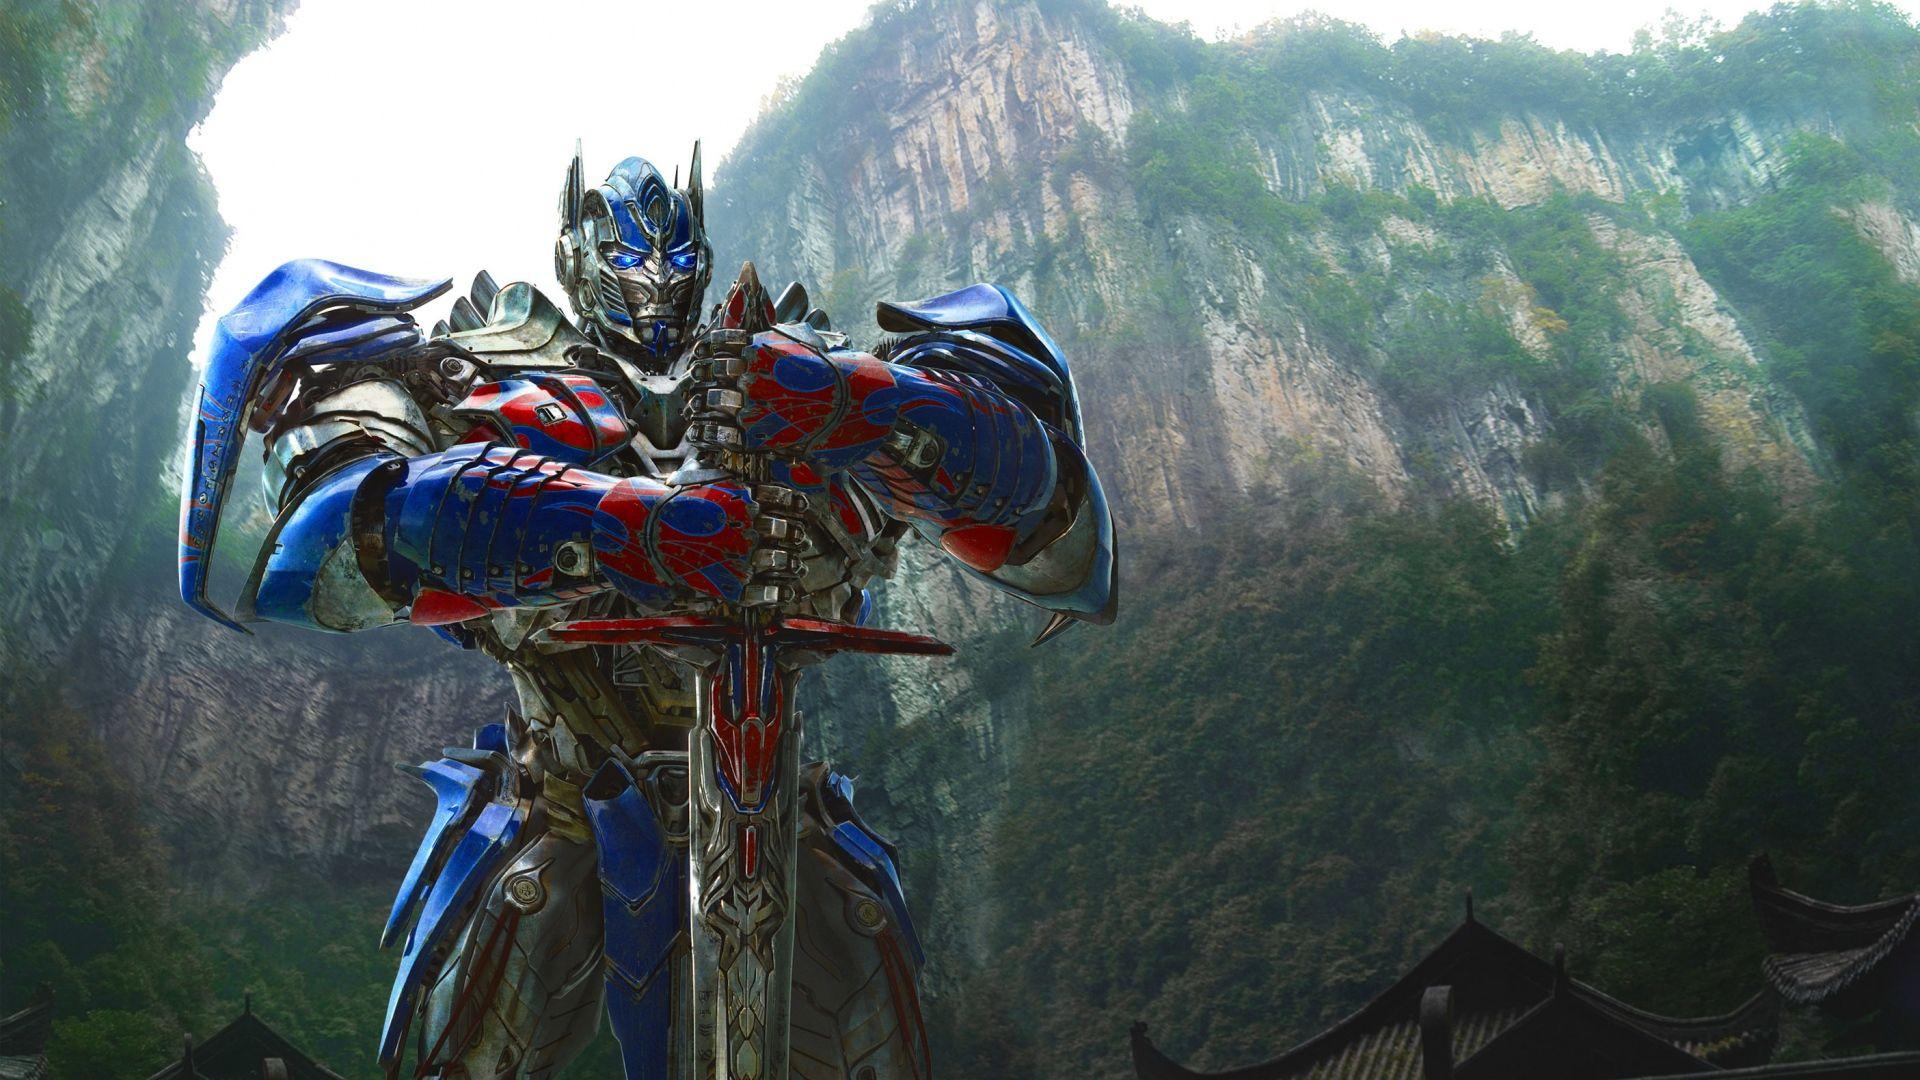 Download Wallpaper 1920x1080 Transformers age of extinction